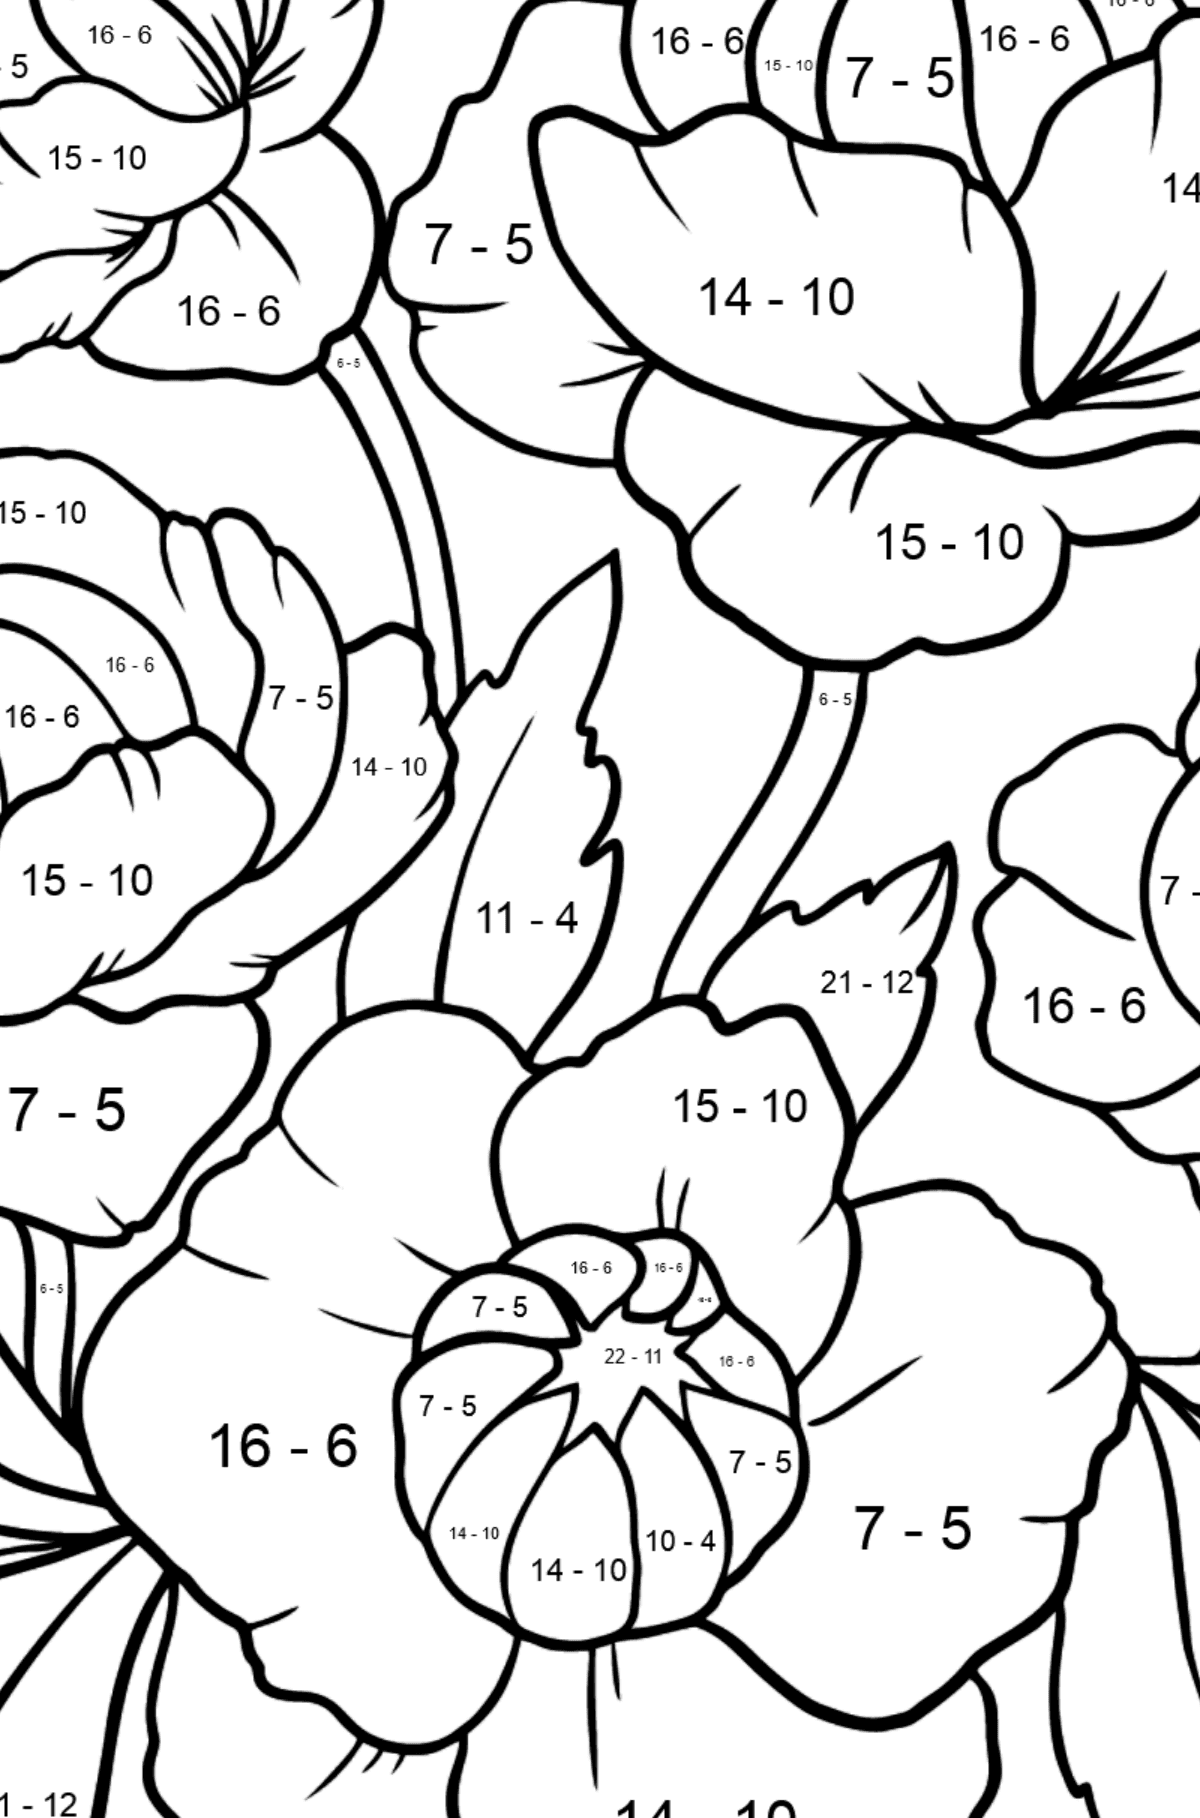 Red Globeflower Coloring Page - Math Coloring - Subtraction for Kids